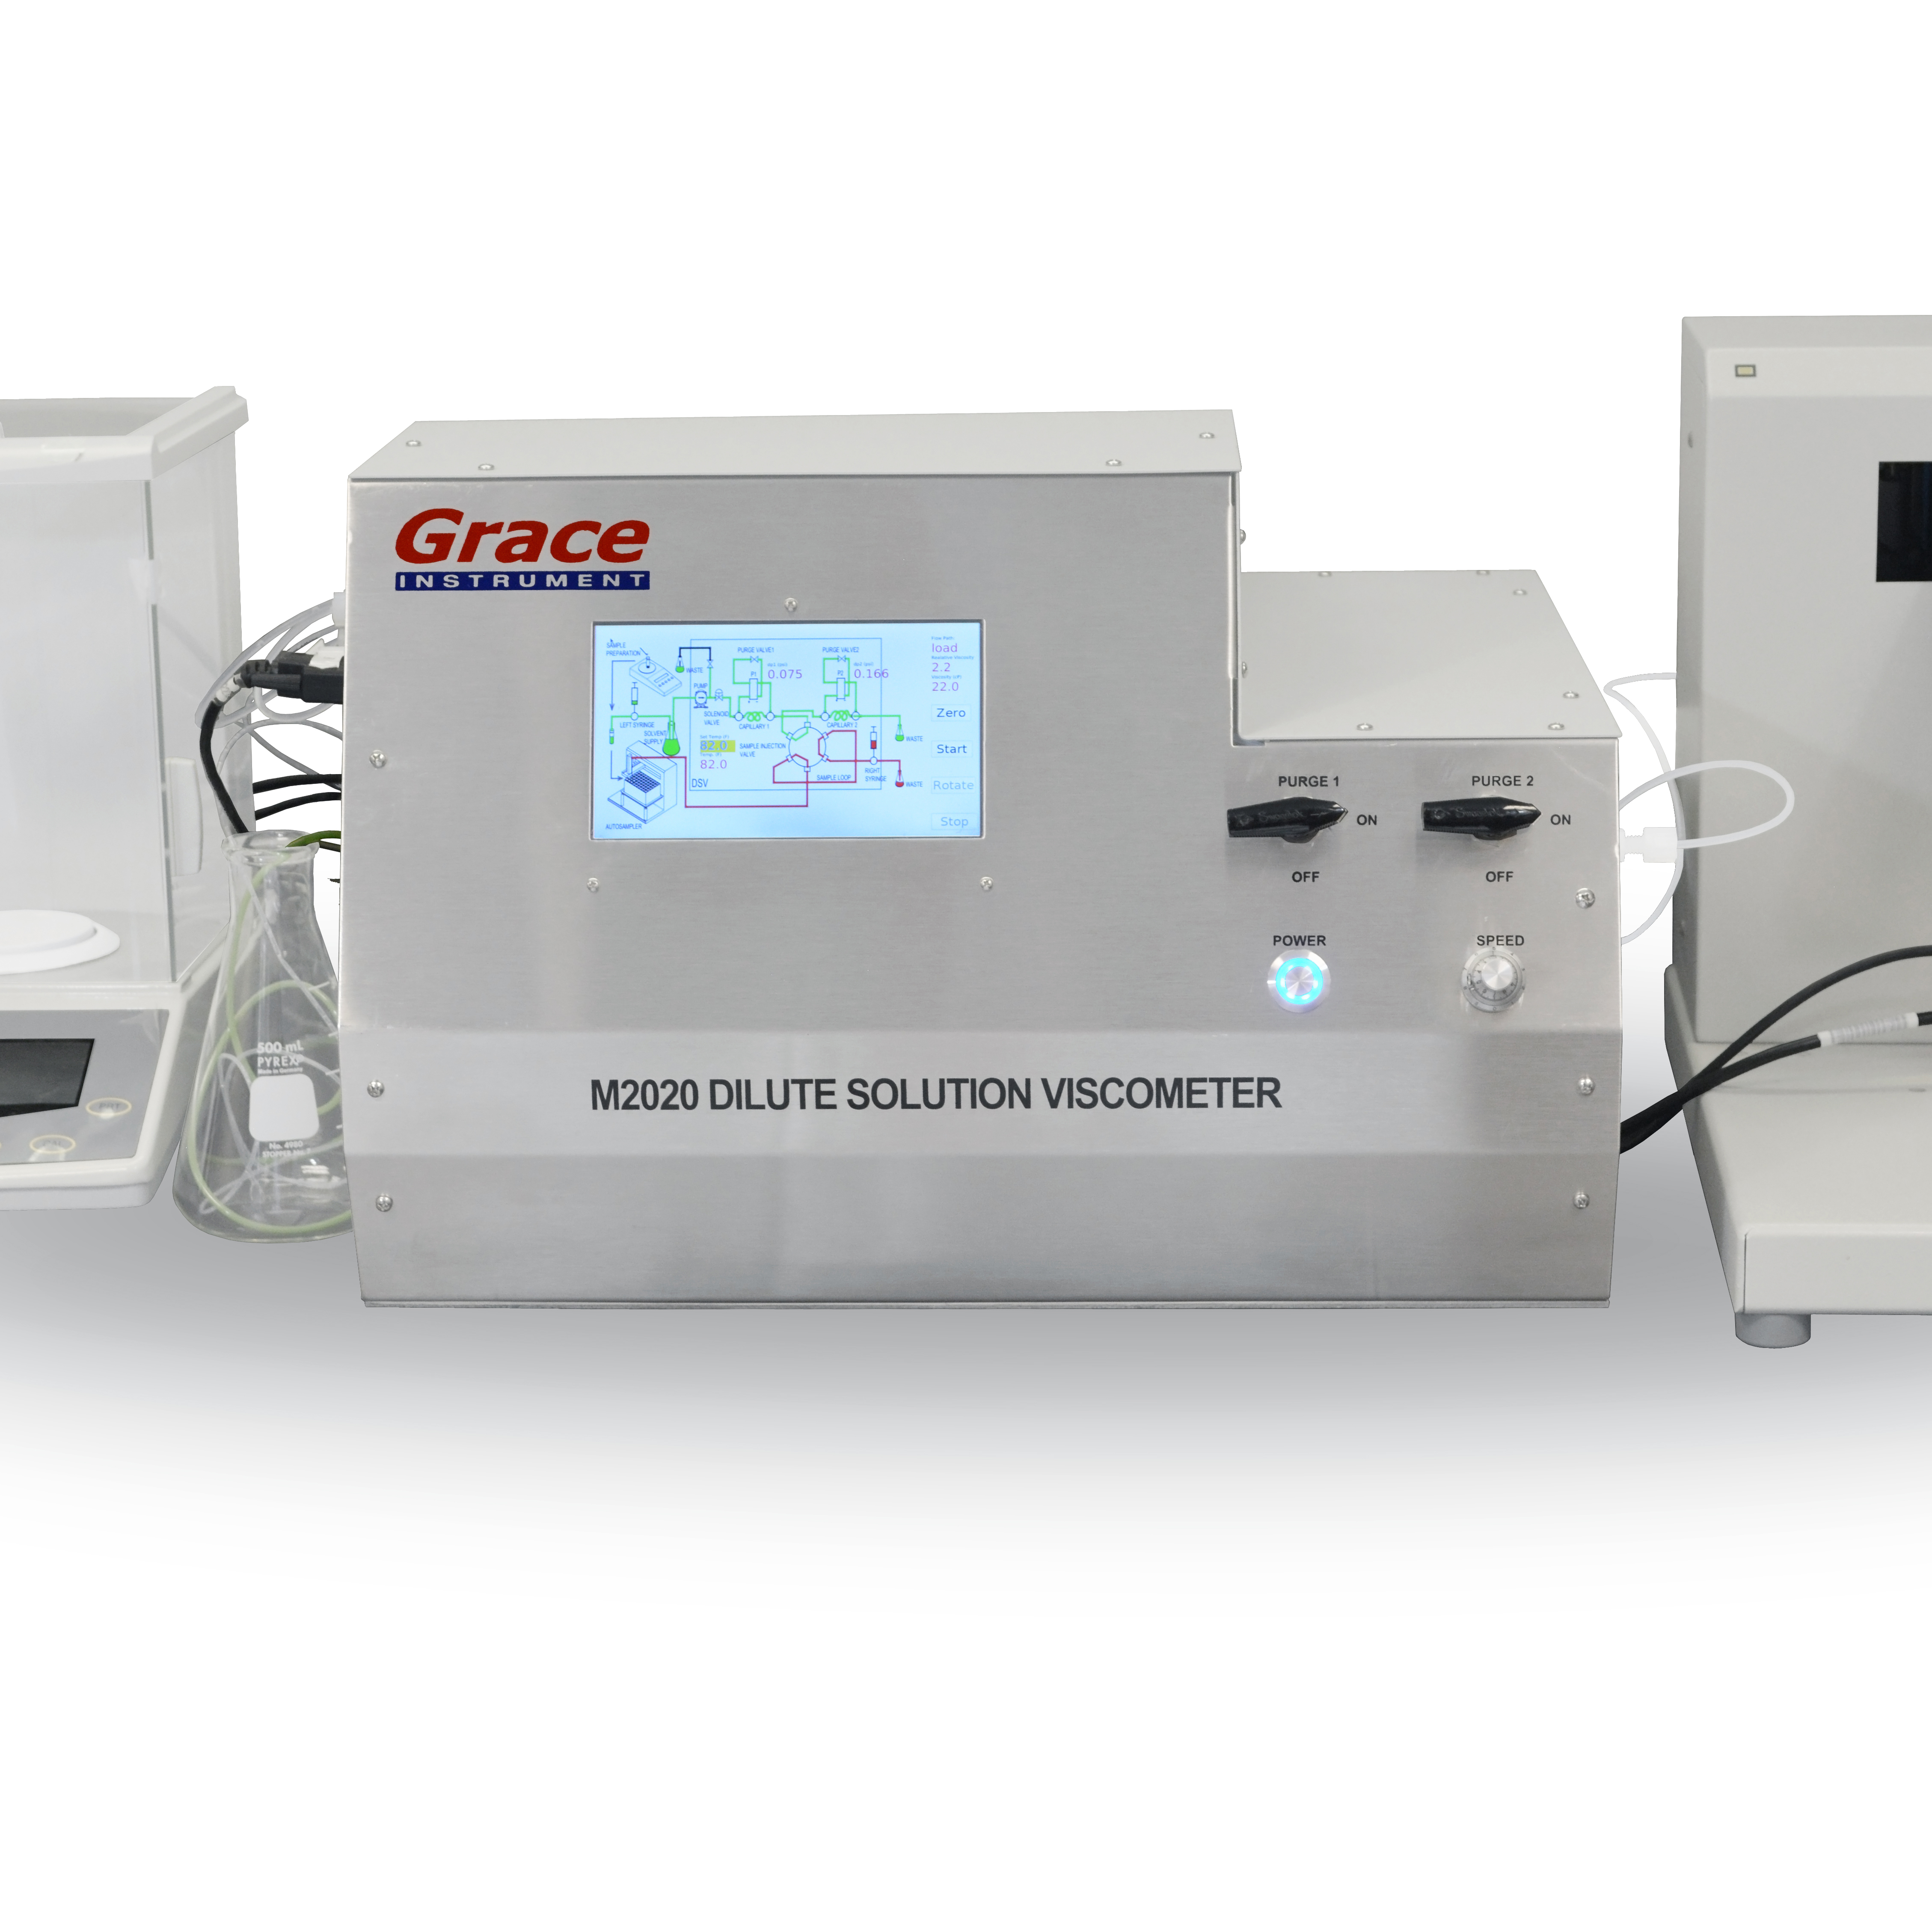 Full Automation Comes Standard with the Grace Instrument M2020 Dilute Solution Viscometer (DSV)